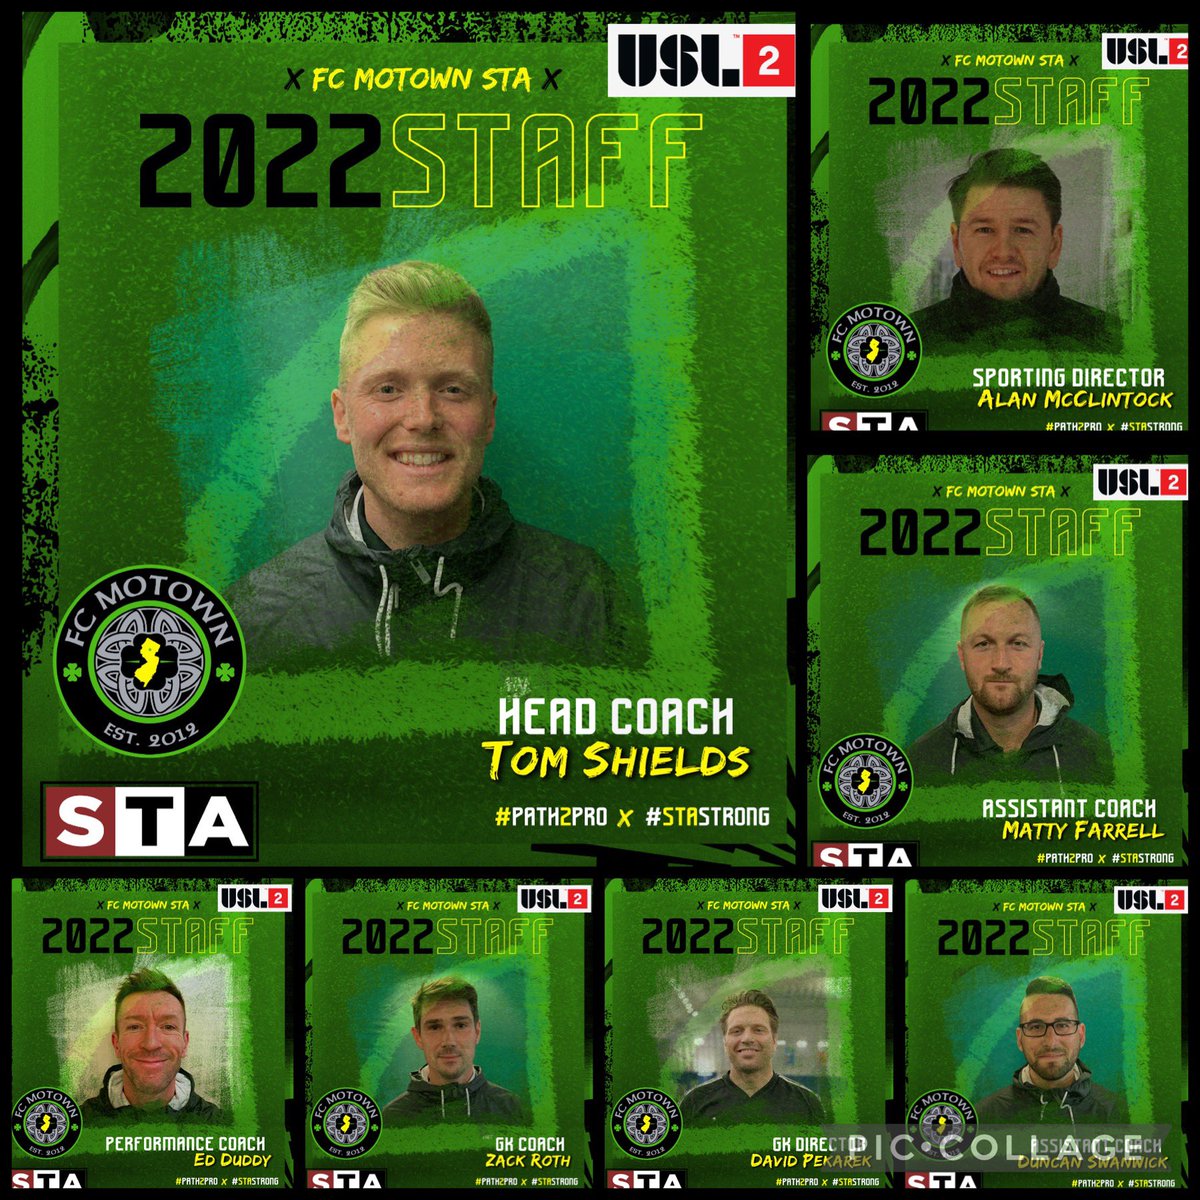 Fc Motown Celtics Coaching Staff For This Summers Uslleaguetwo Campaign In Partnership With Sta Soccer Has Been Announced Amp What A Great Staff It Is The Team Will Have Some Of